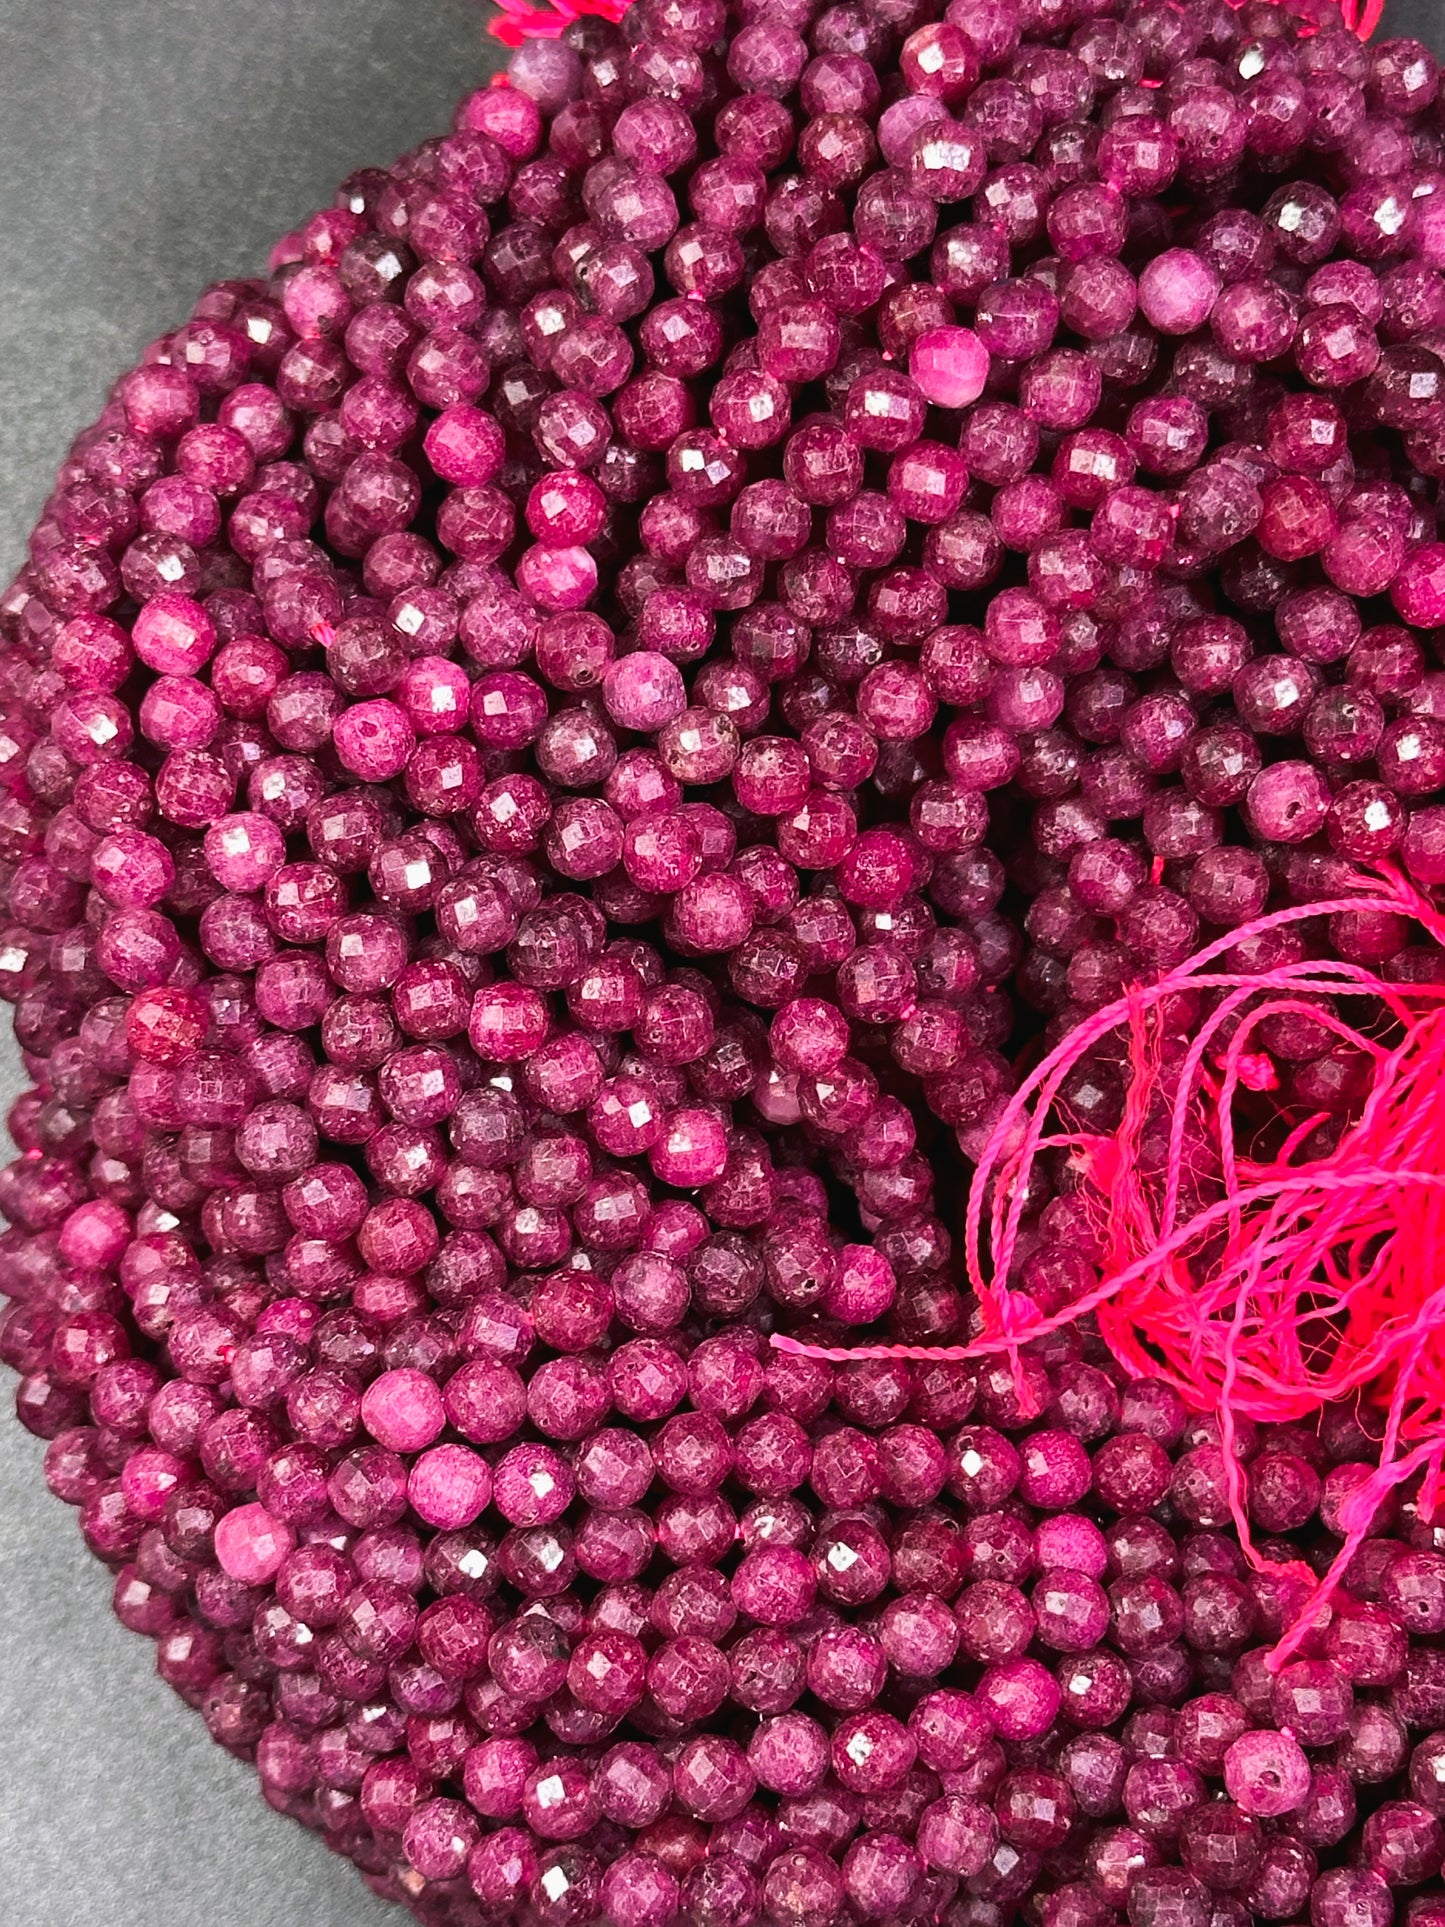 AAA Natural Ruby Quartz Faceted 3mm 4mm 5mm Round Bead, Beautiful Red Pink Color Ruby Quartz Gemstone Excellent Quality Full Strand 15.5"